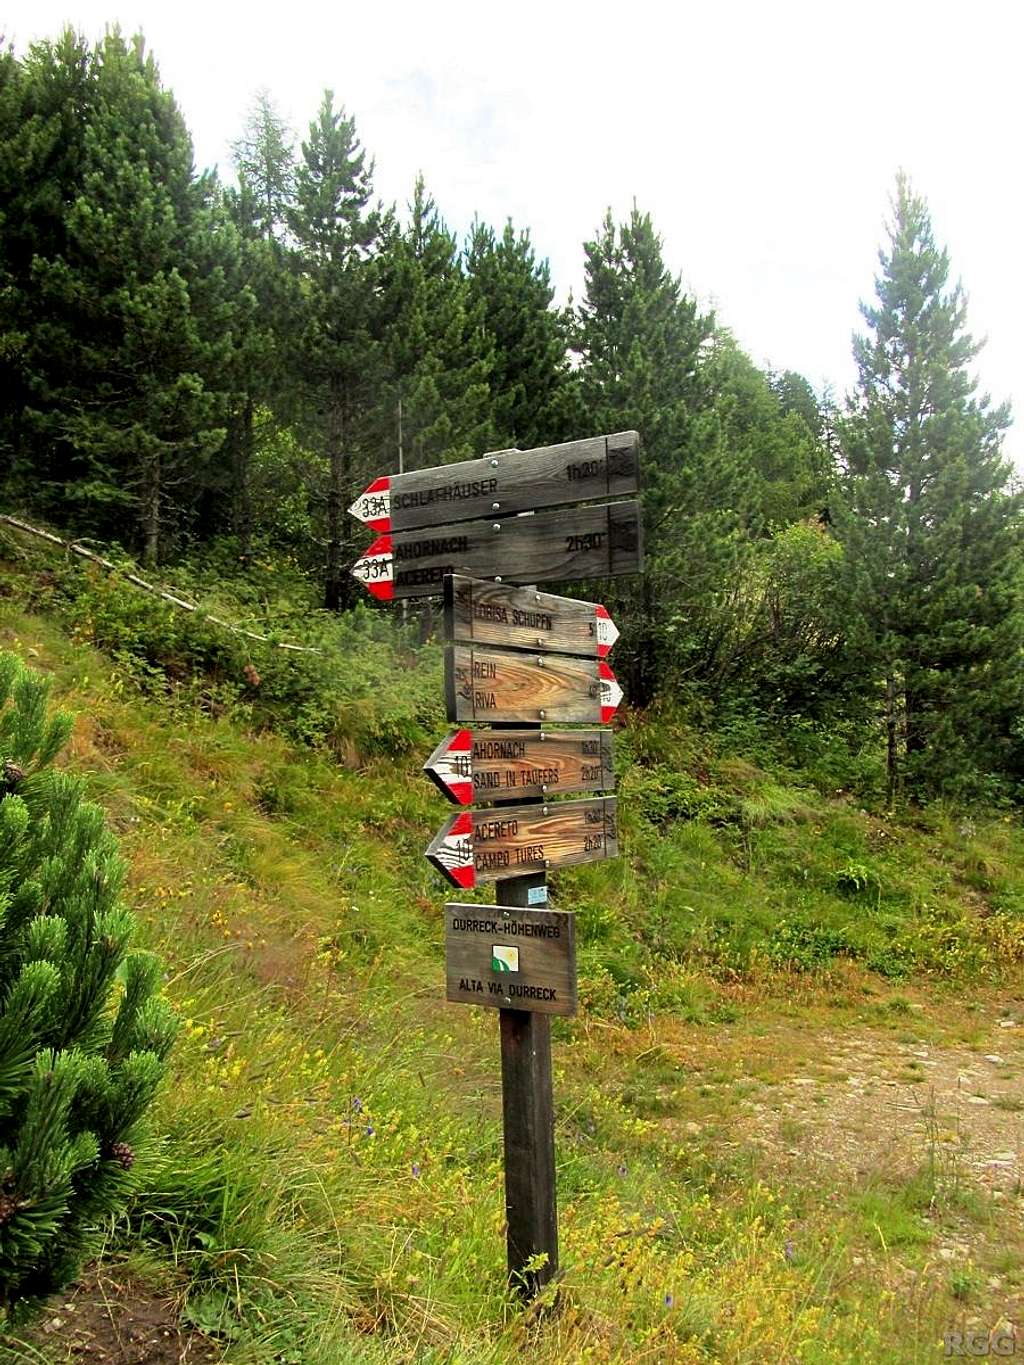 Signpost at the turnoff to the Großer Moosstock